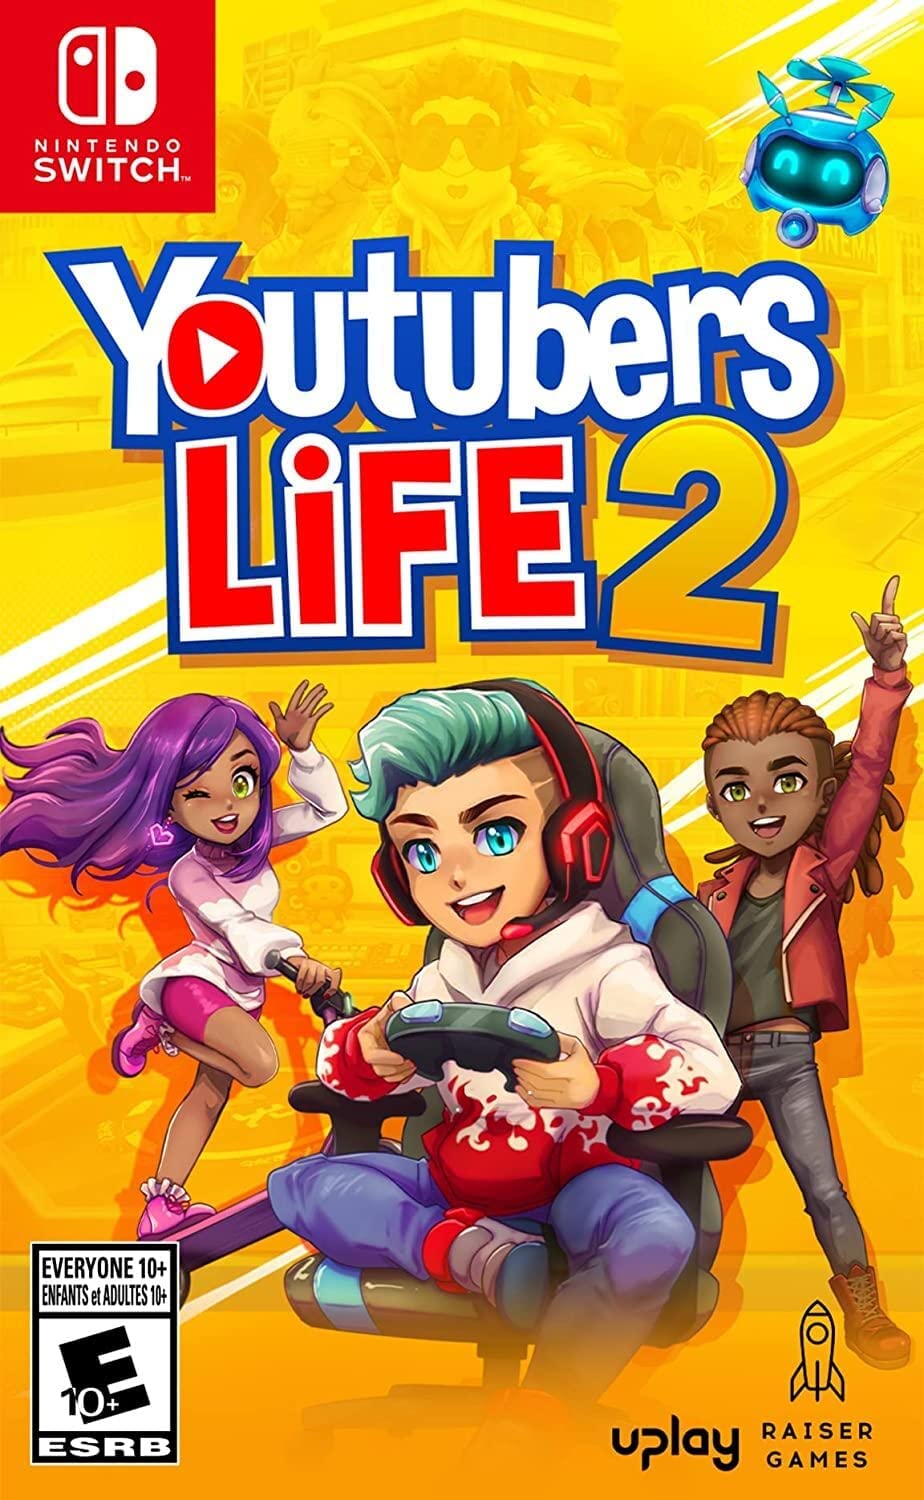 Youtubers Life 2 (Switch)